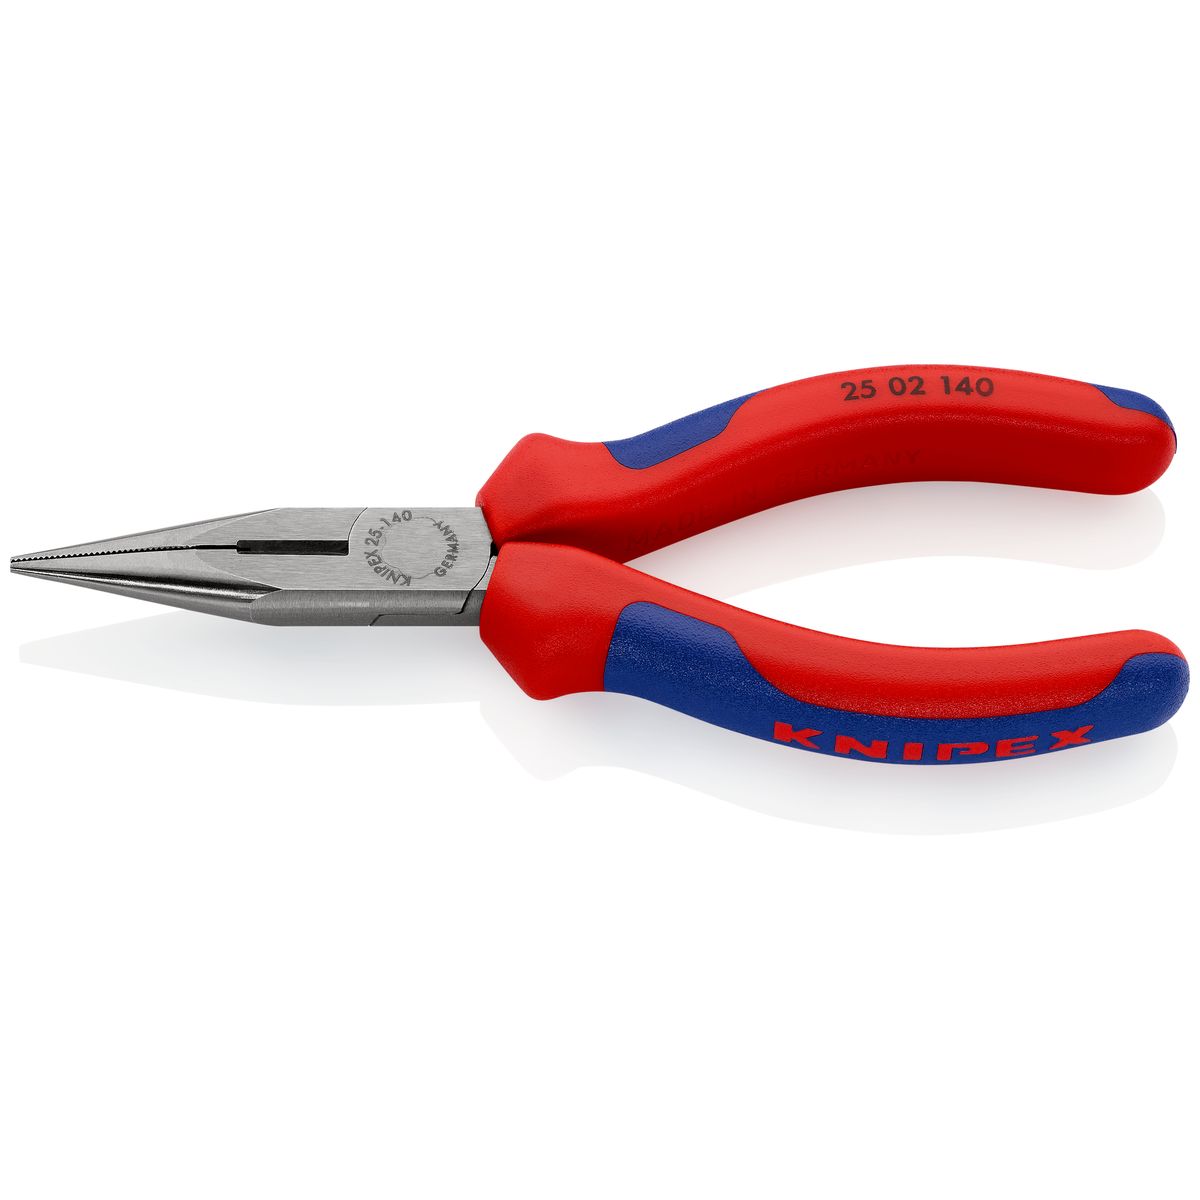 CHAIN NOSE SIDE CUTTING PLIERS 2502140 Knipex